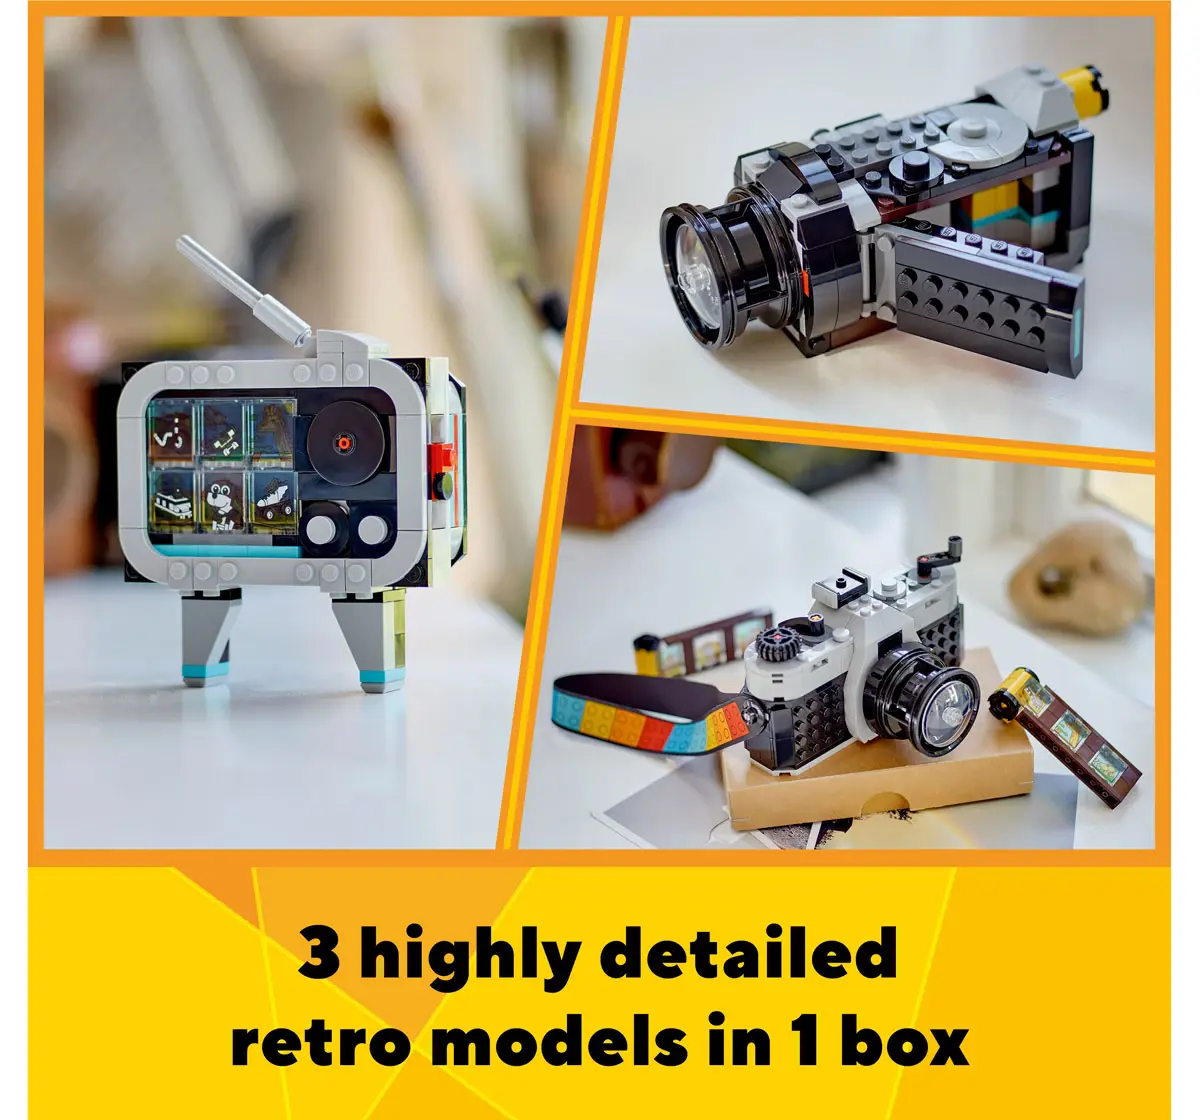 Lego Creator Retro Camera 3 In 1 Toy 31147 Multicolour For Kids Ages 8Y+ (261 Pieces) 